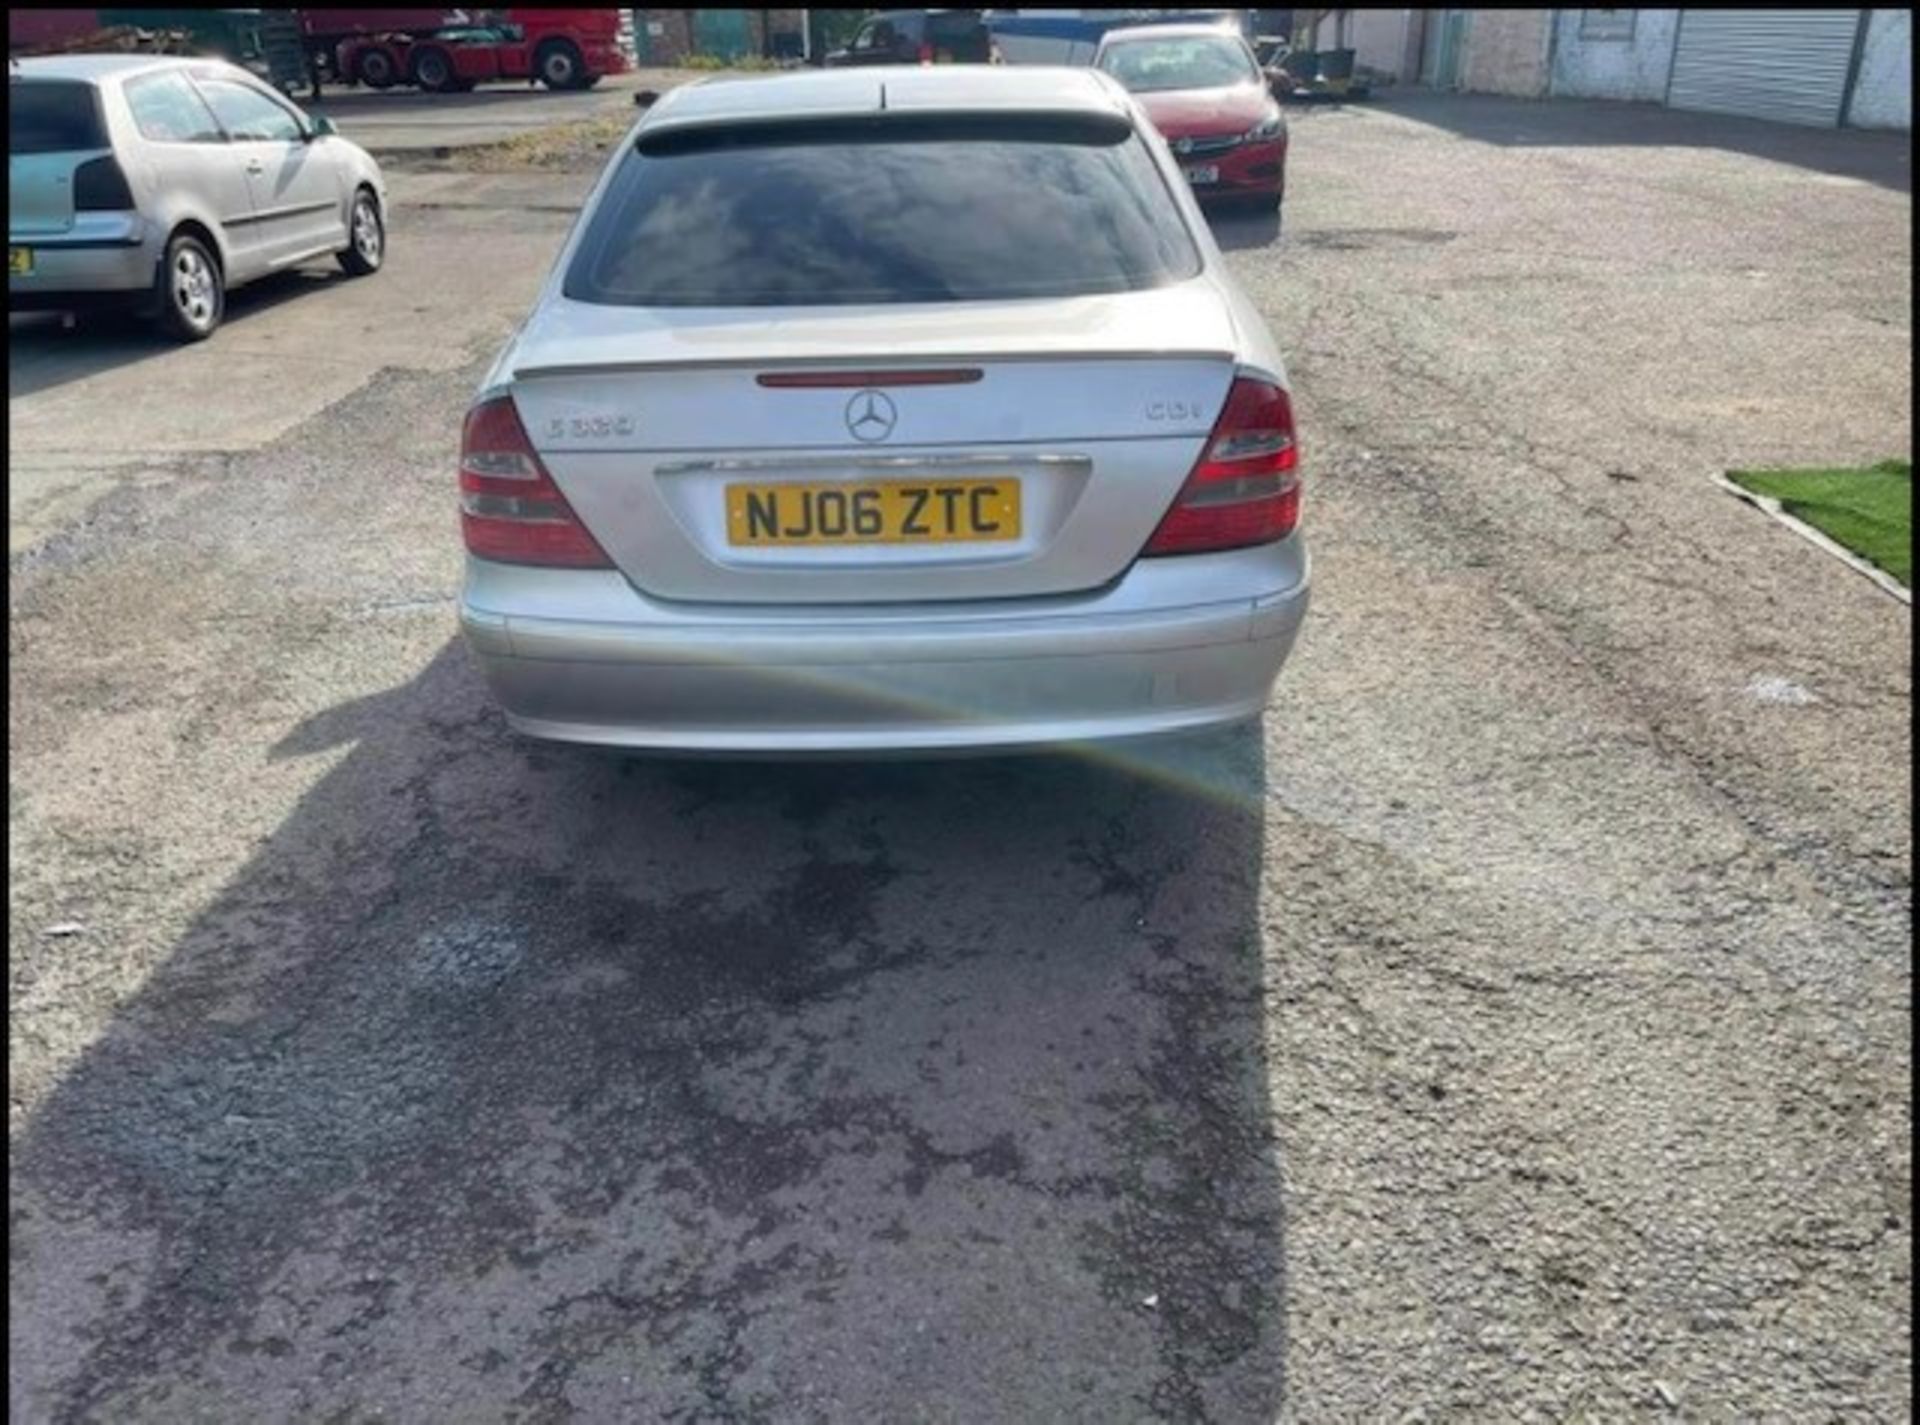 Mercedes E320 CDI 103k genuine miles ,as per pictures has scratches as shown in photos but is all in - Image 4 of 14